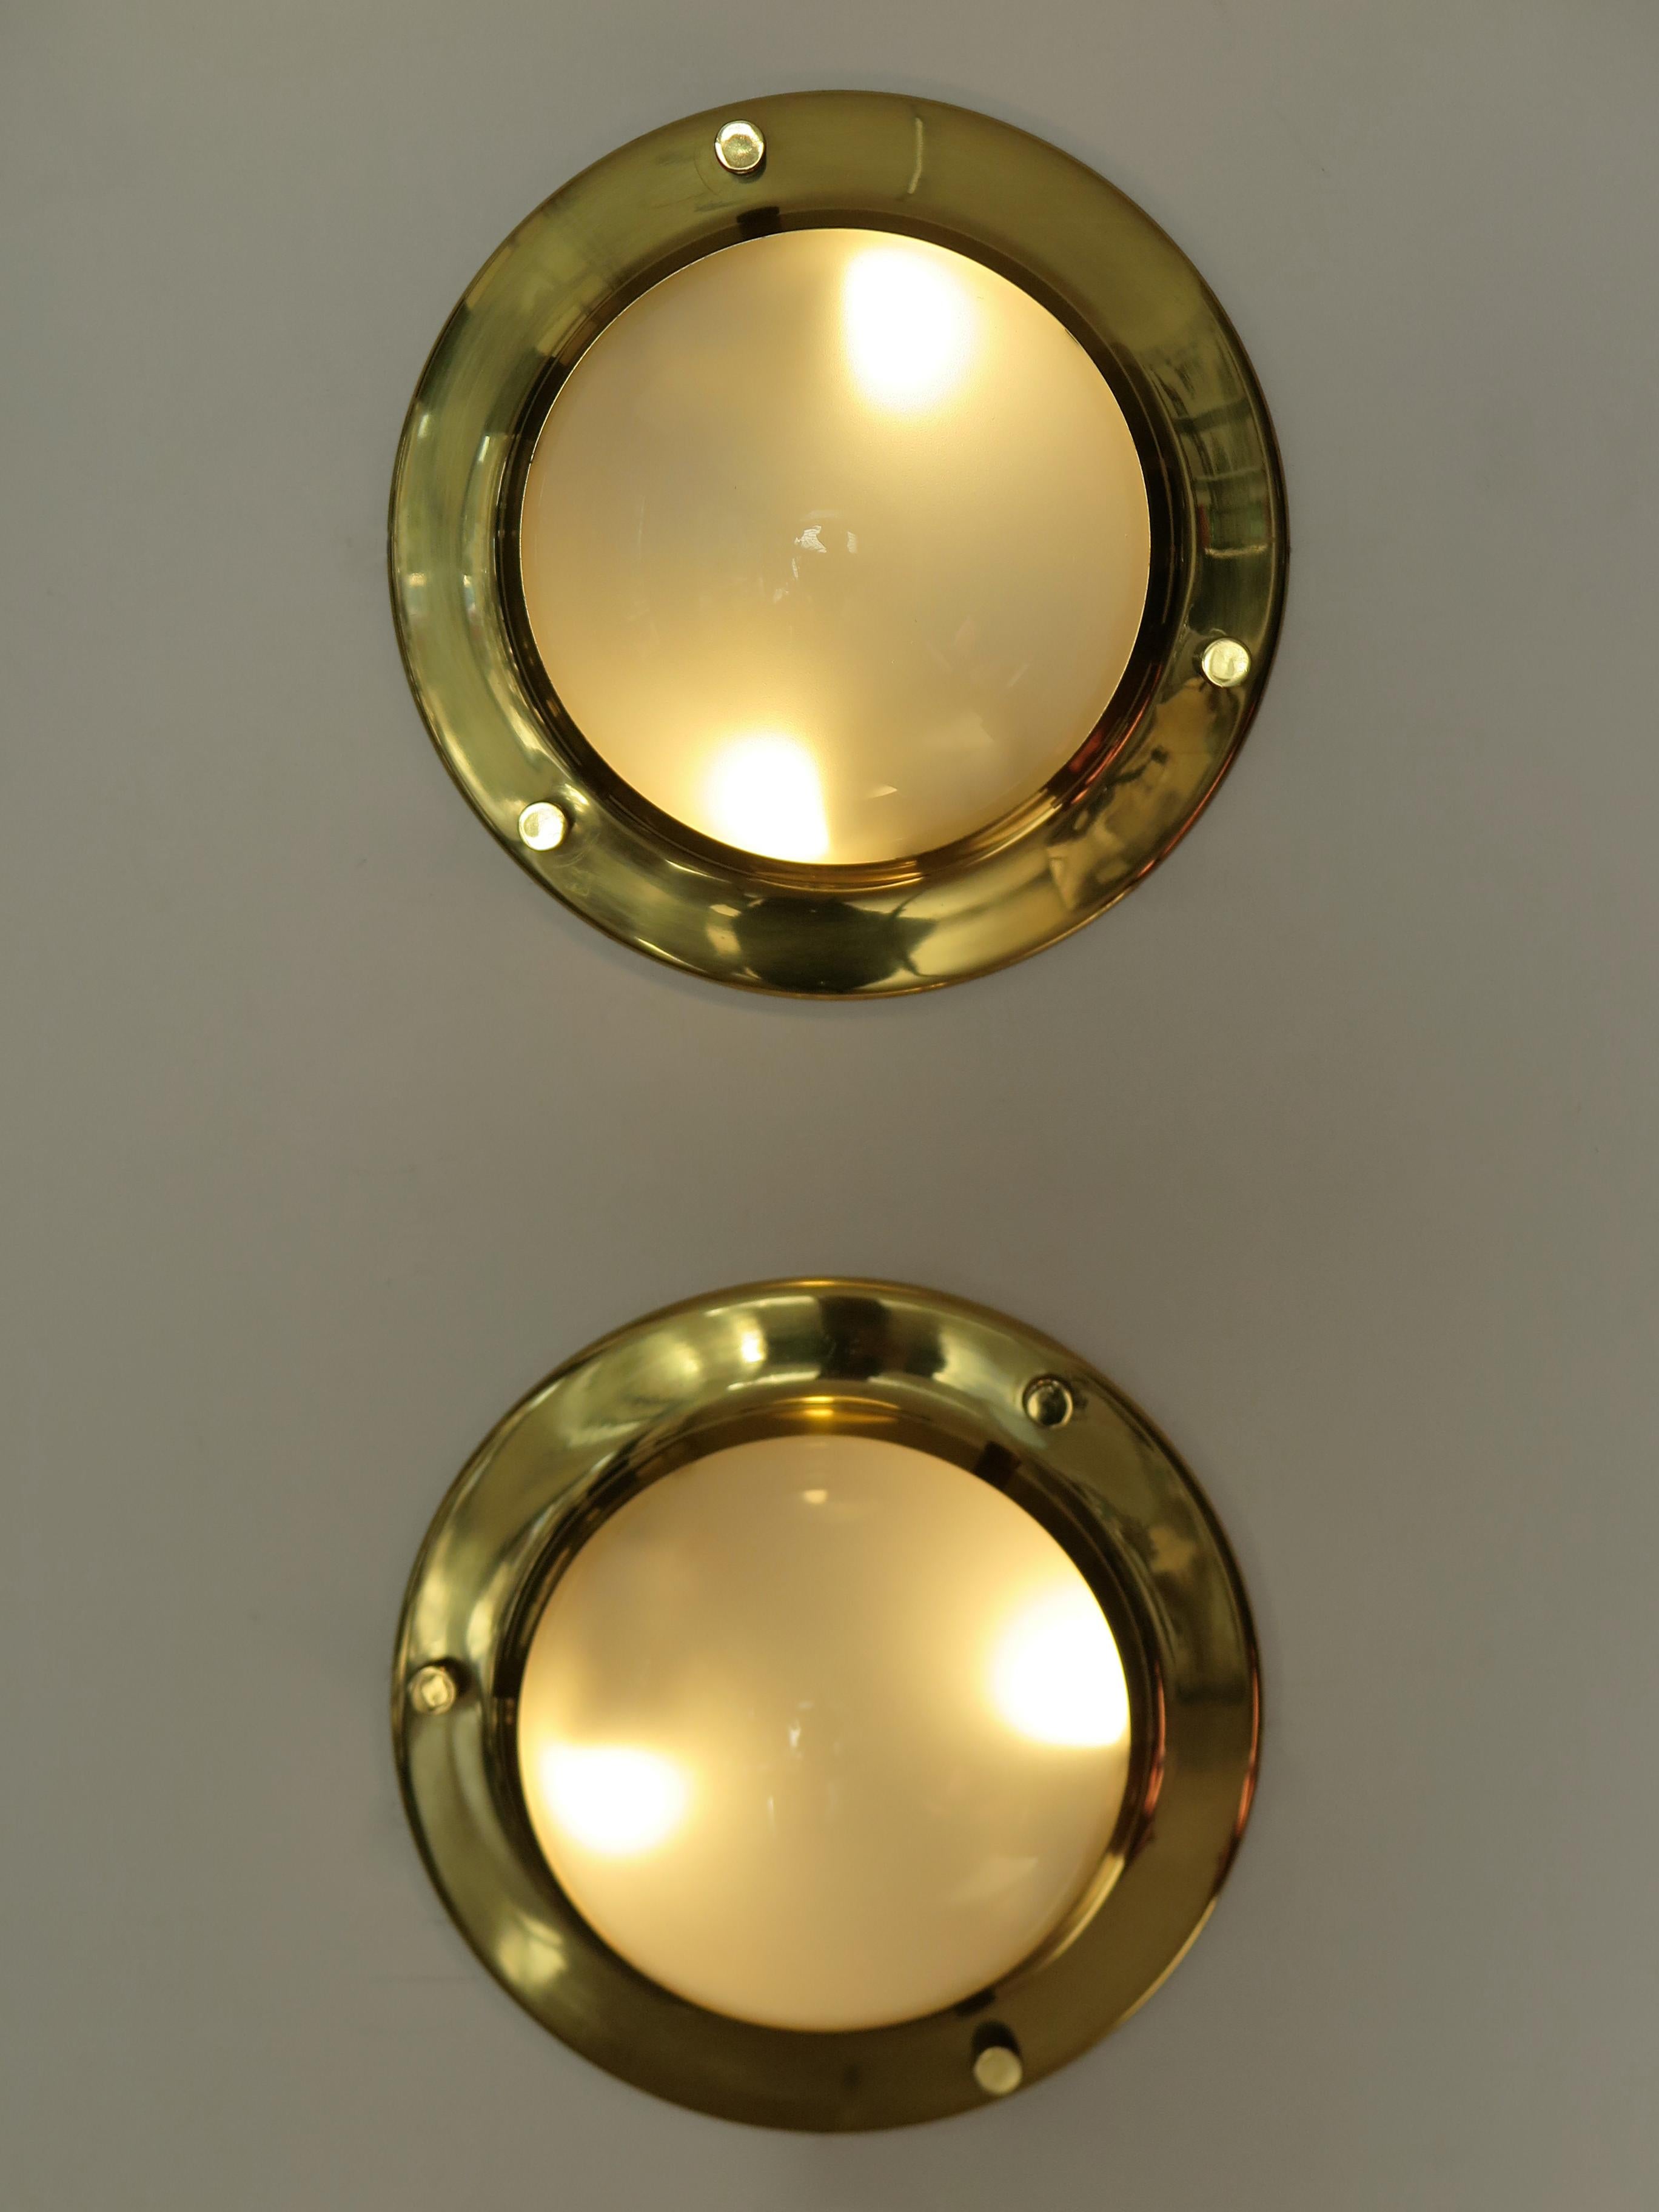 Italian midcentury modern design set of two scones wall lamps or ceiling lamps model “LSP6 Tommy” designed by Luigi Caccia Dominioni (Milan 1913 - Milan 2016) and produced by Azucena from 1965 with polished brass frame and half-sphere diffusers made